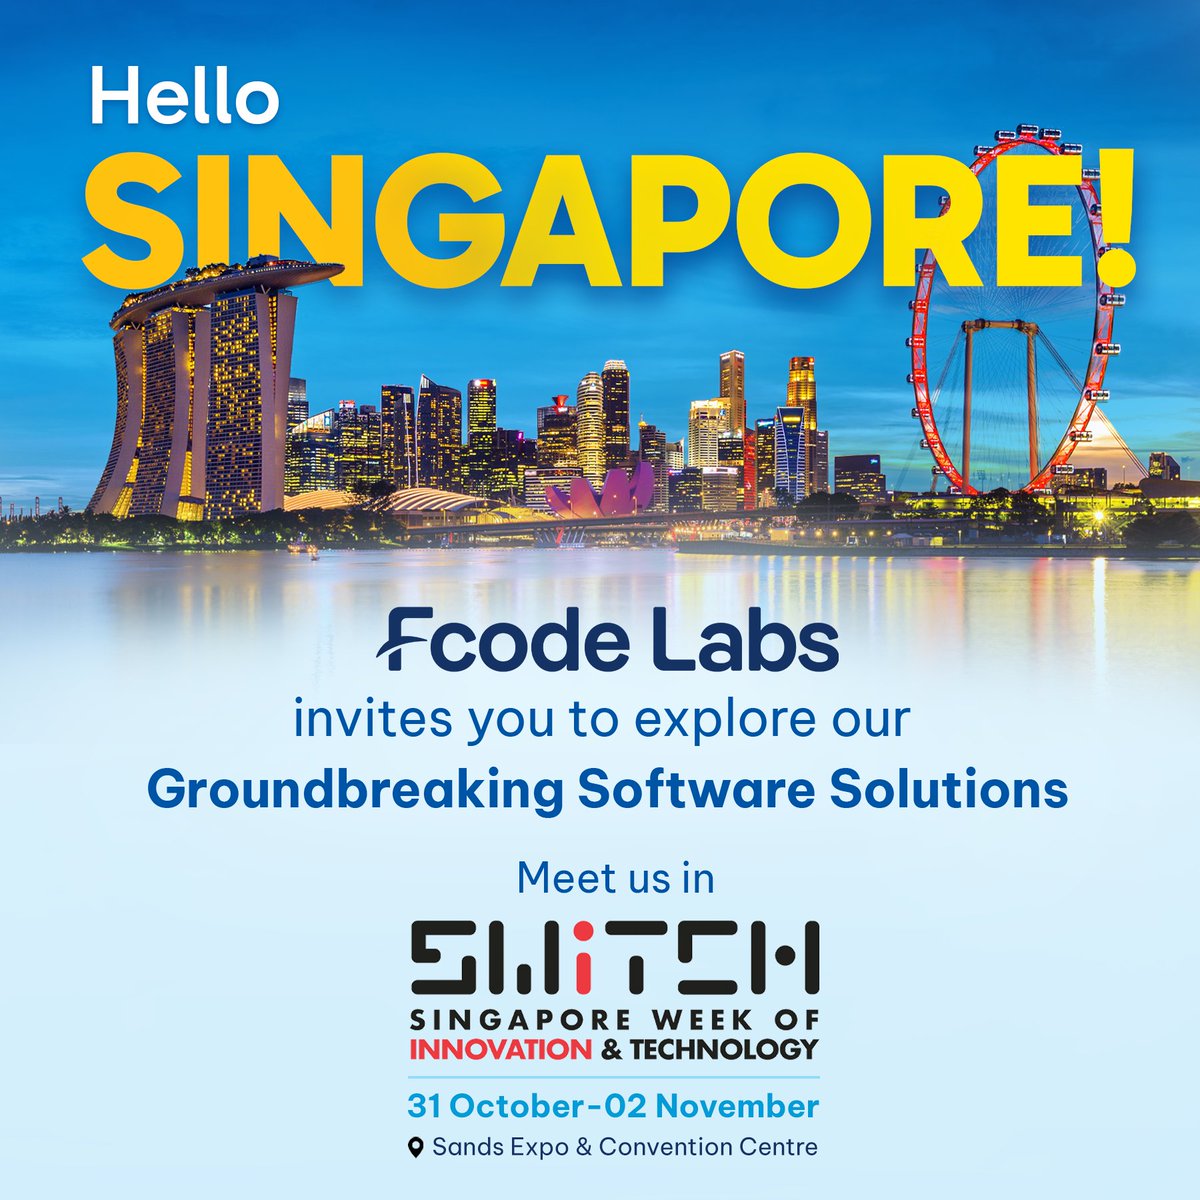 Switch on the possibilities! Fcode Labs explores 'SWITCH' in Singapore, where tech dreams become reality. Join us for a journey into the future of innovation!

#FcodeLabs #SWITCHSingapore